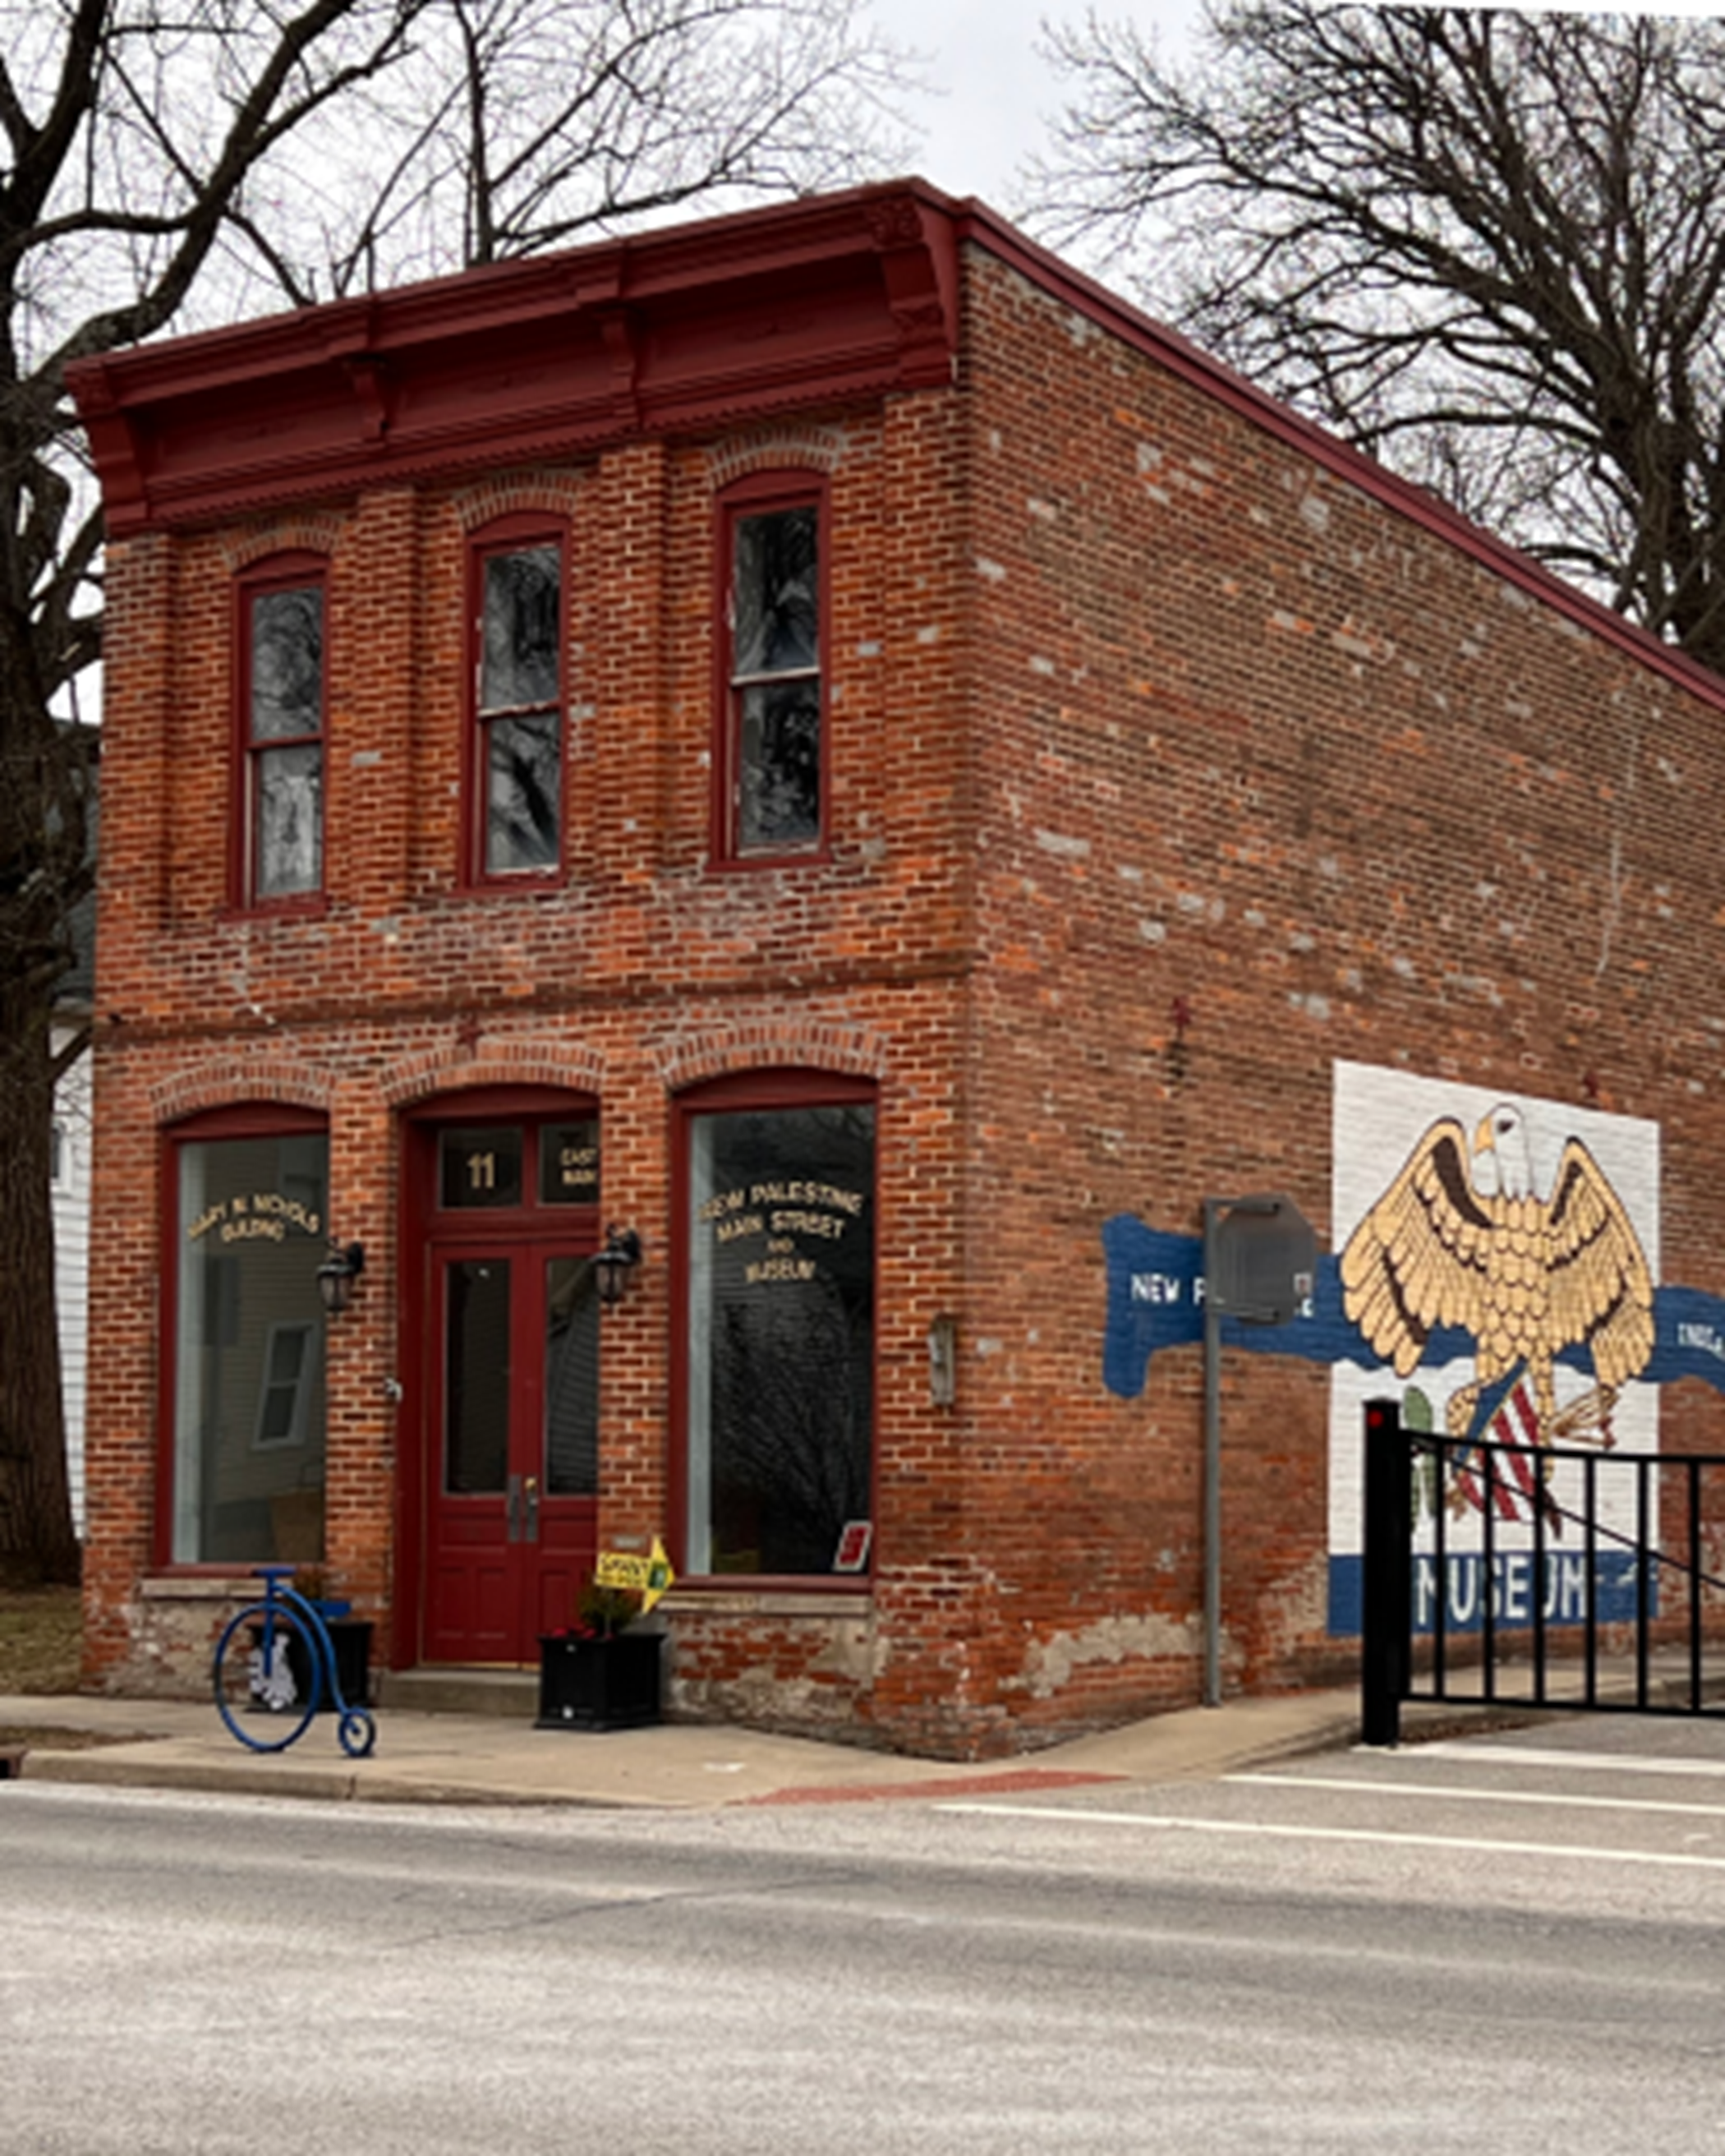 art building in downtown area